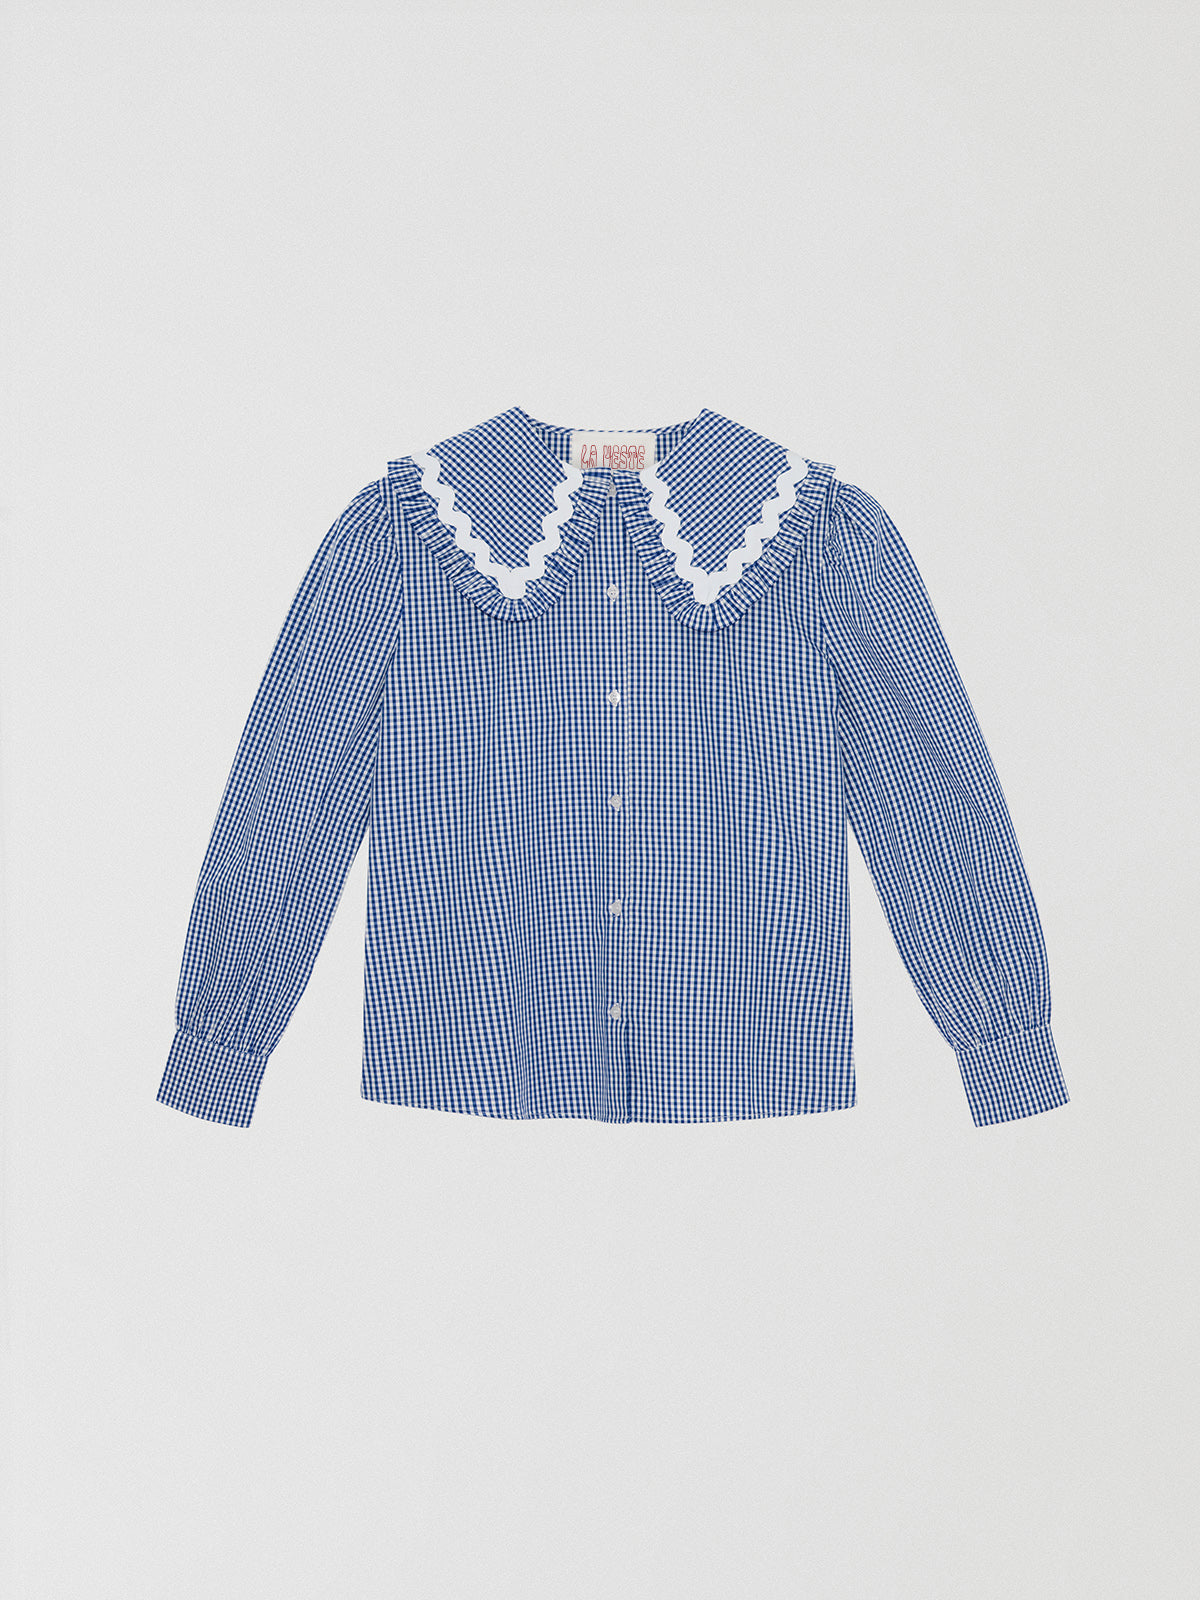 Navy and white vichy check shirt made of cotton with white trim detail on the collar